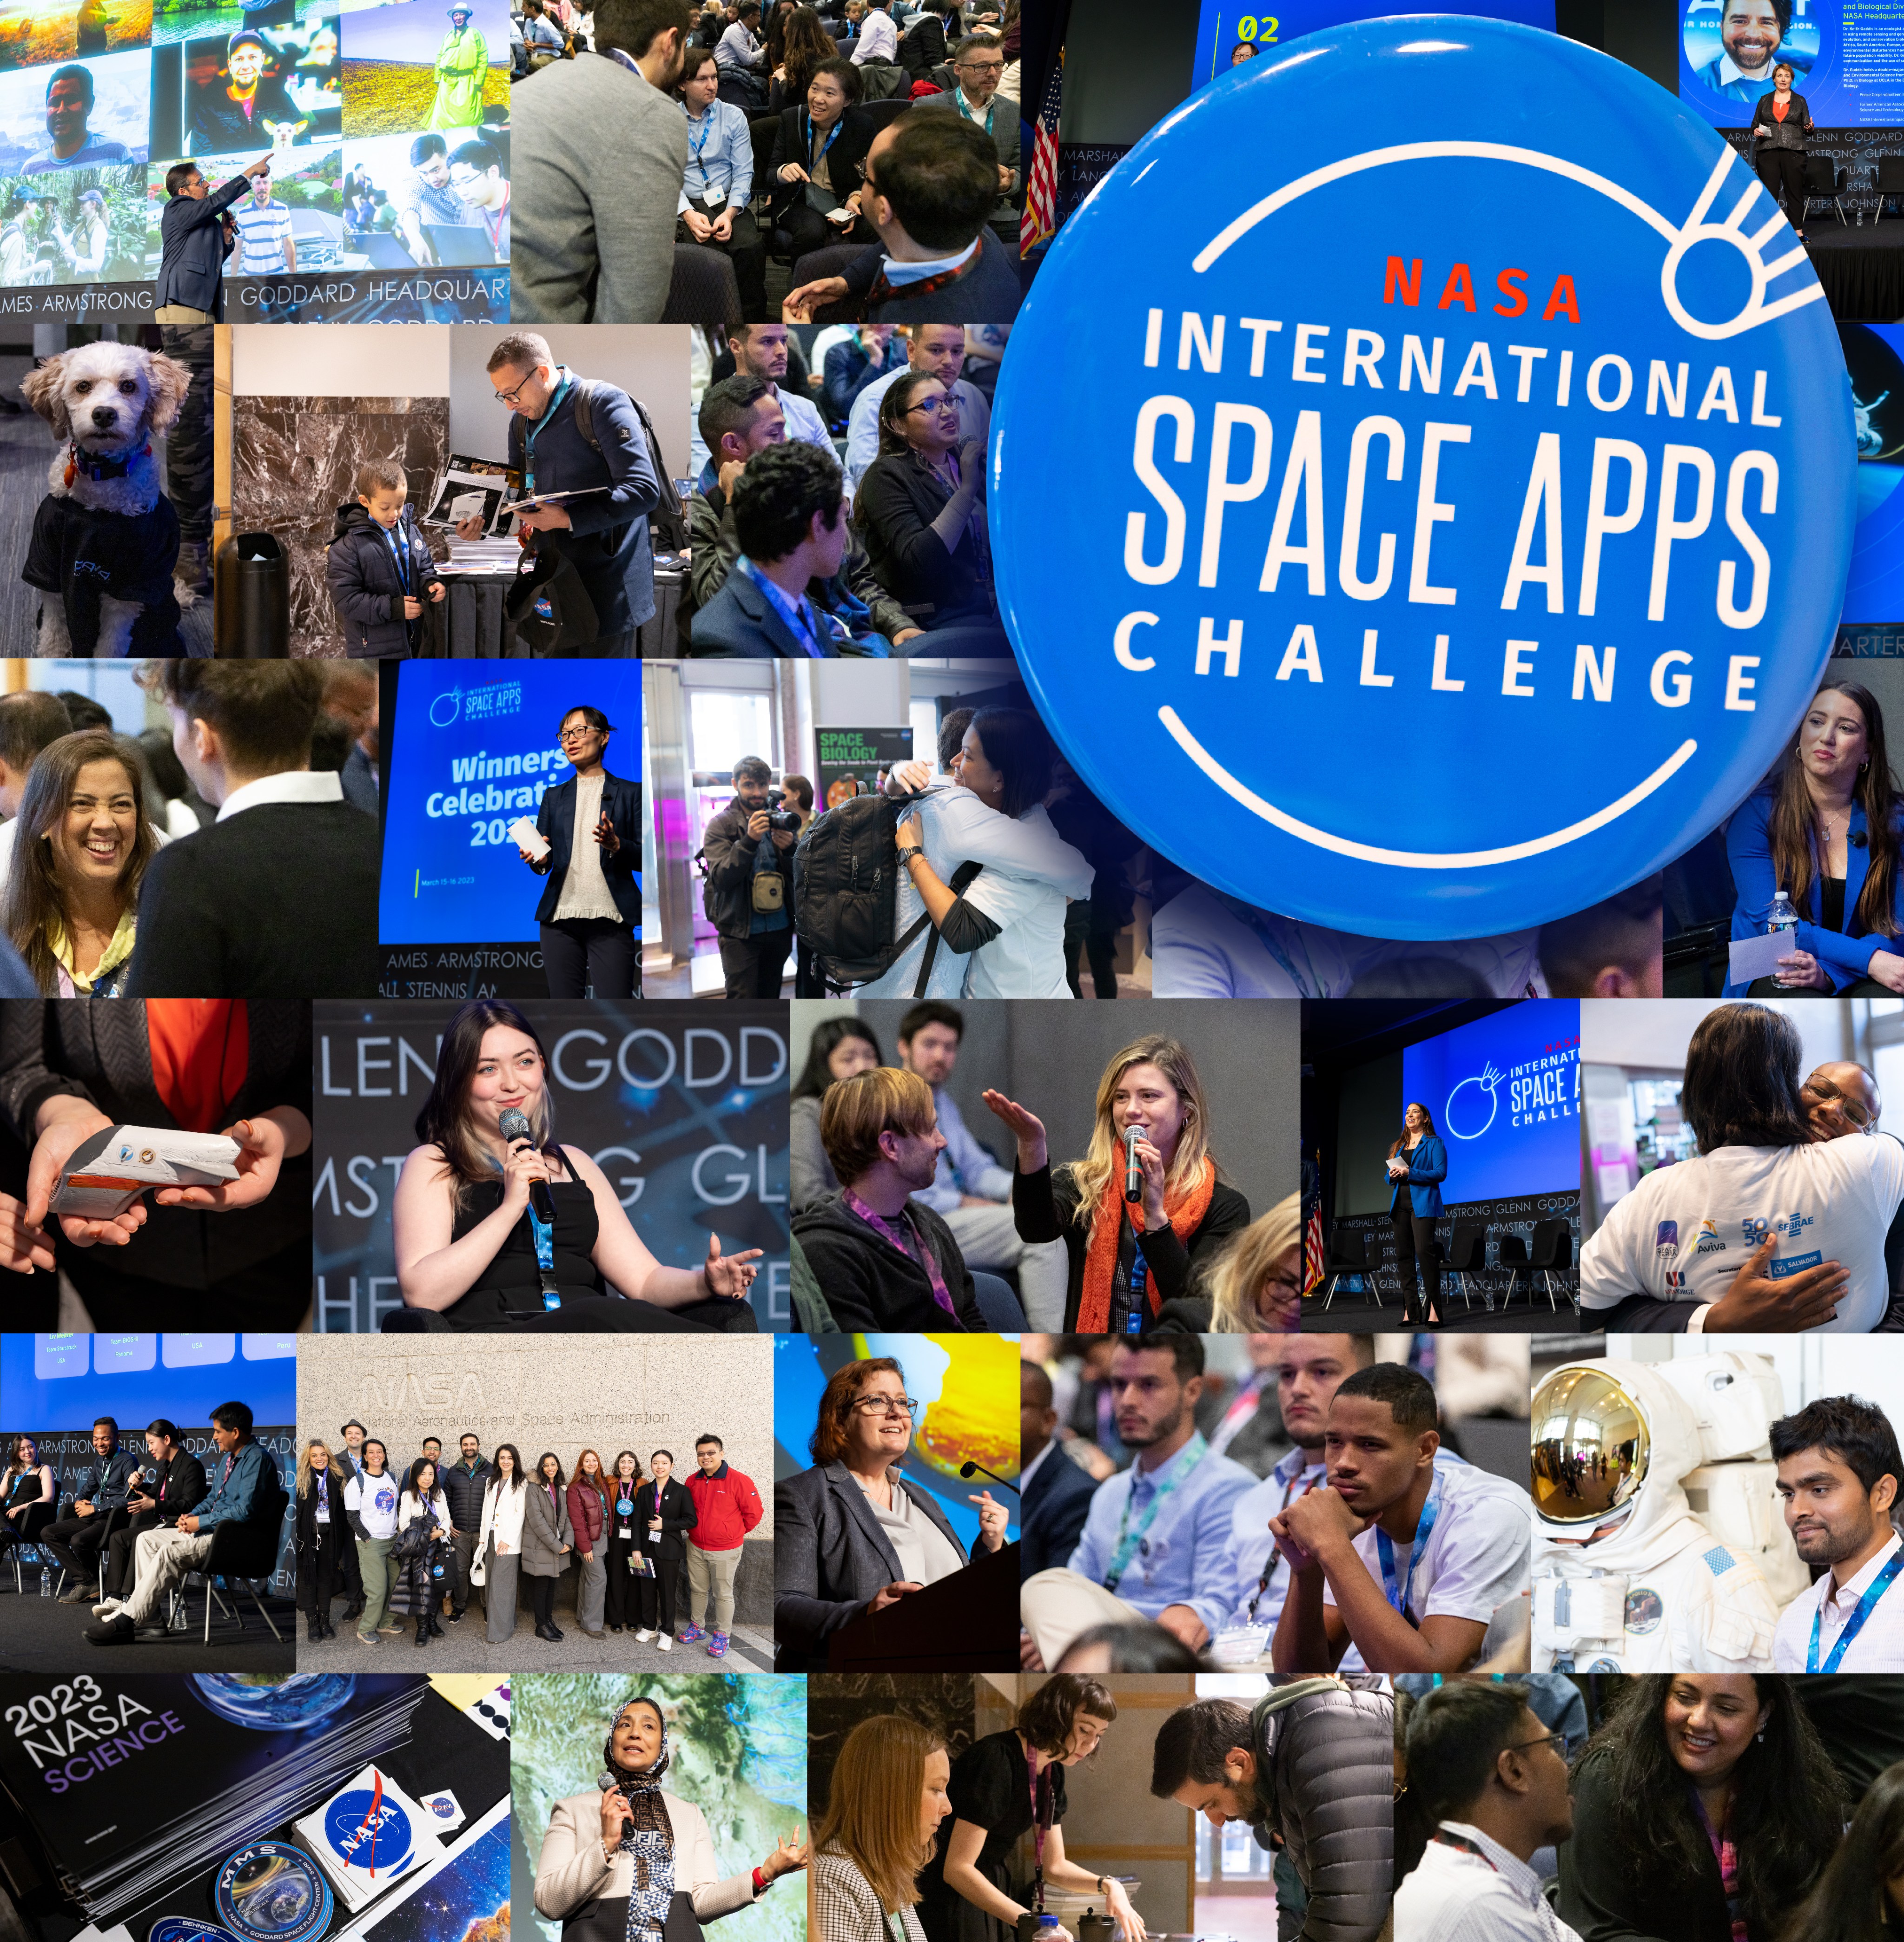 Collage of images and a logo for the NASA Space Apps Challenge